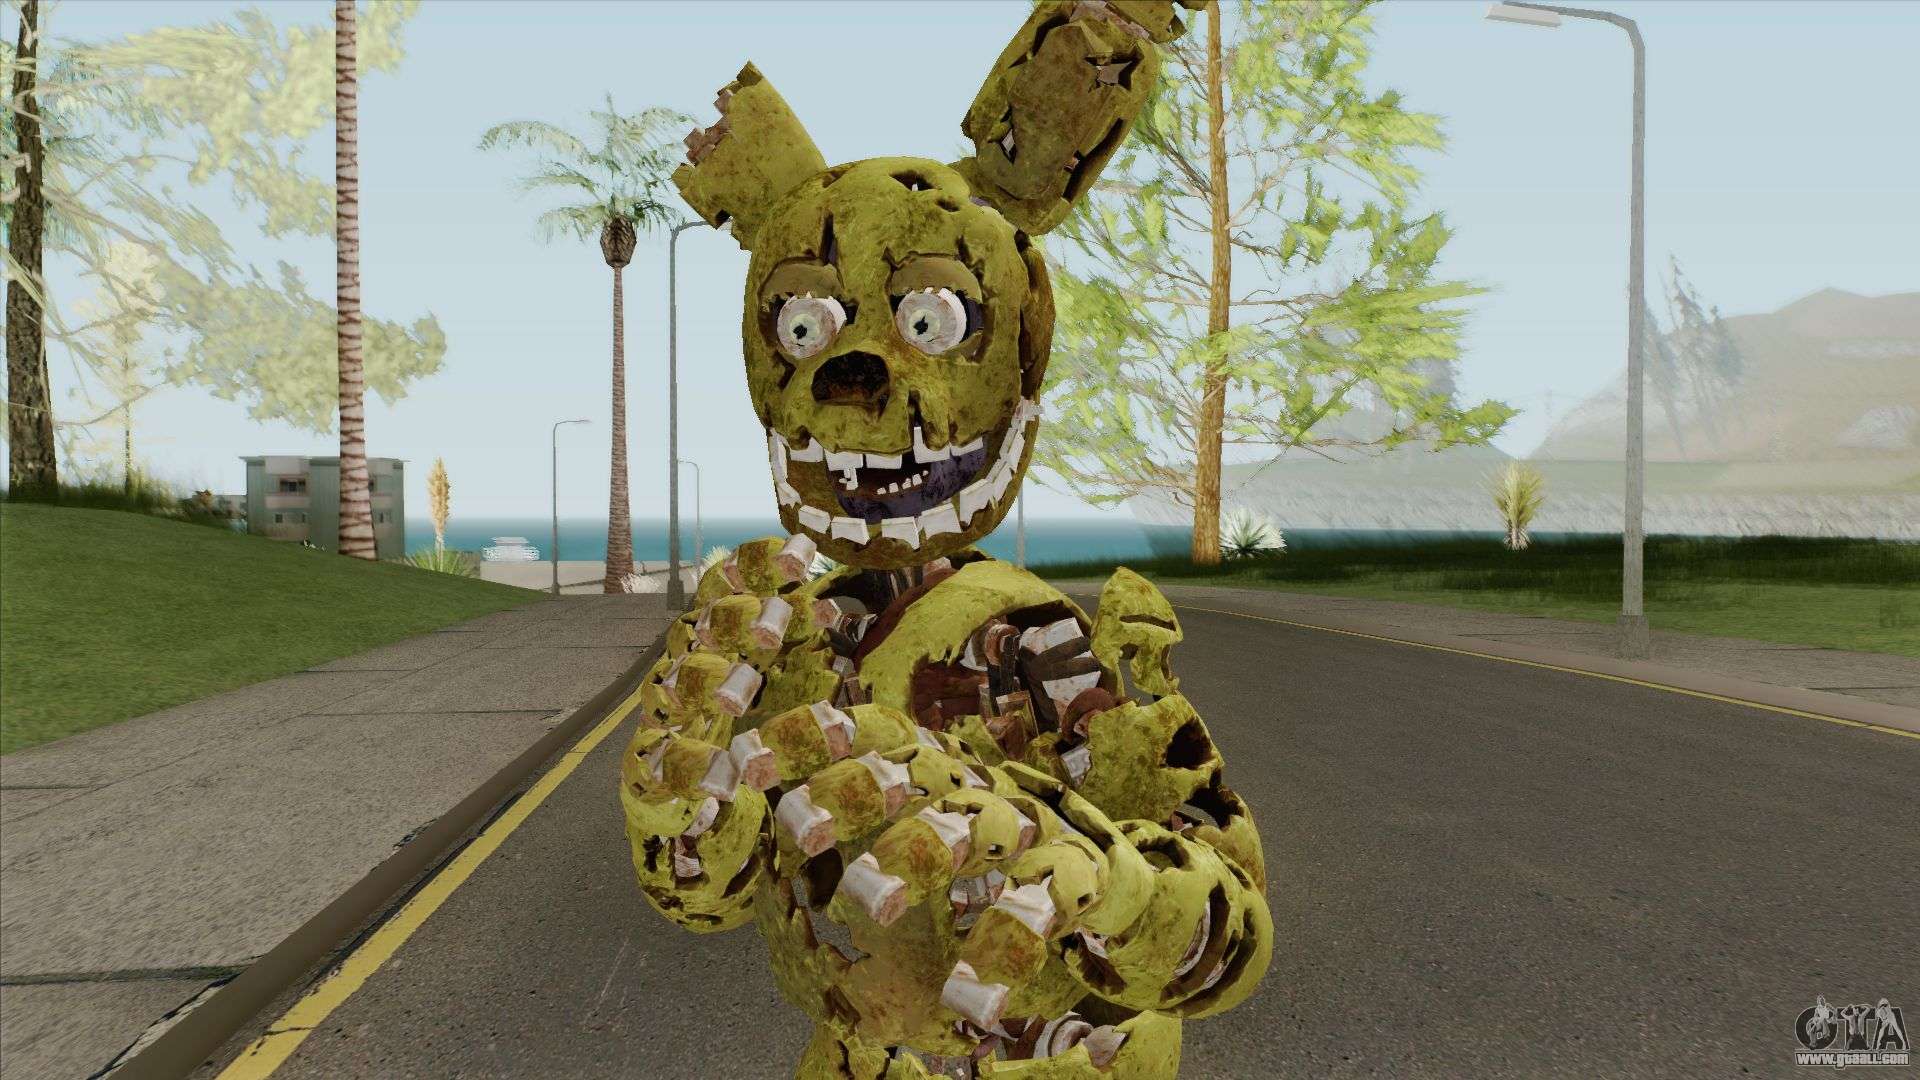 Download (FNAF 3) Springtrap 1.0 - Springtrap from Five Nights at Freddy's 3  for GTA 5